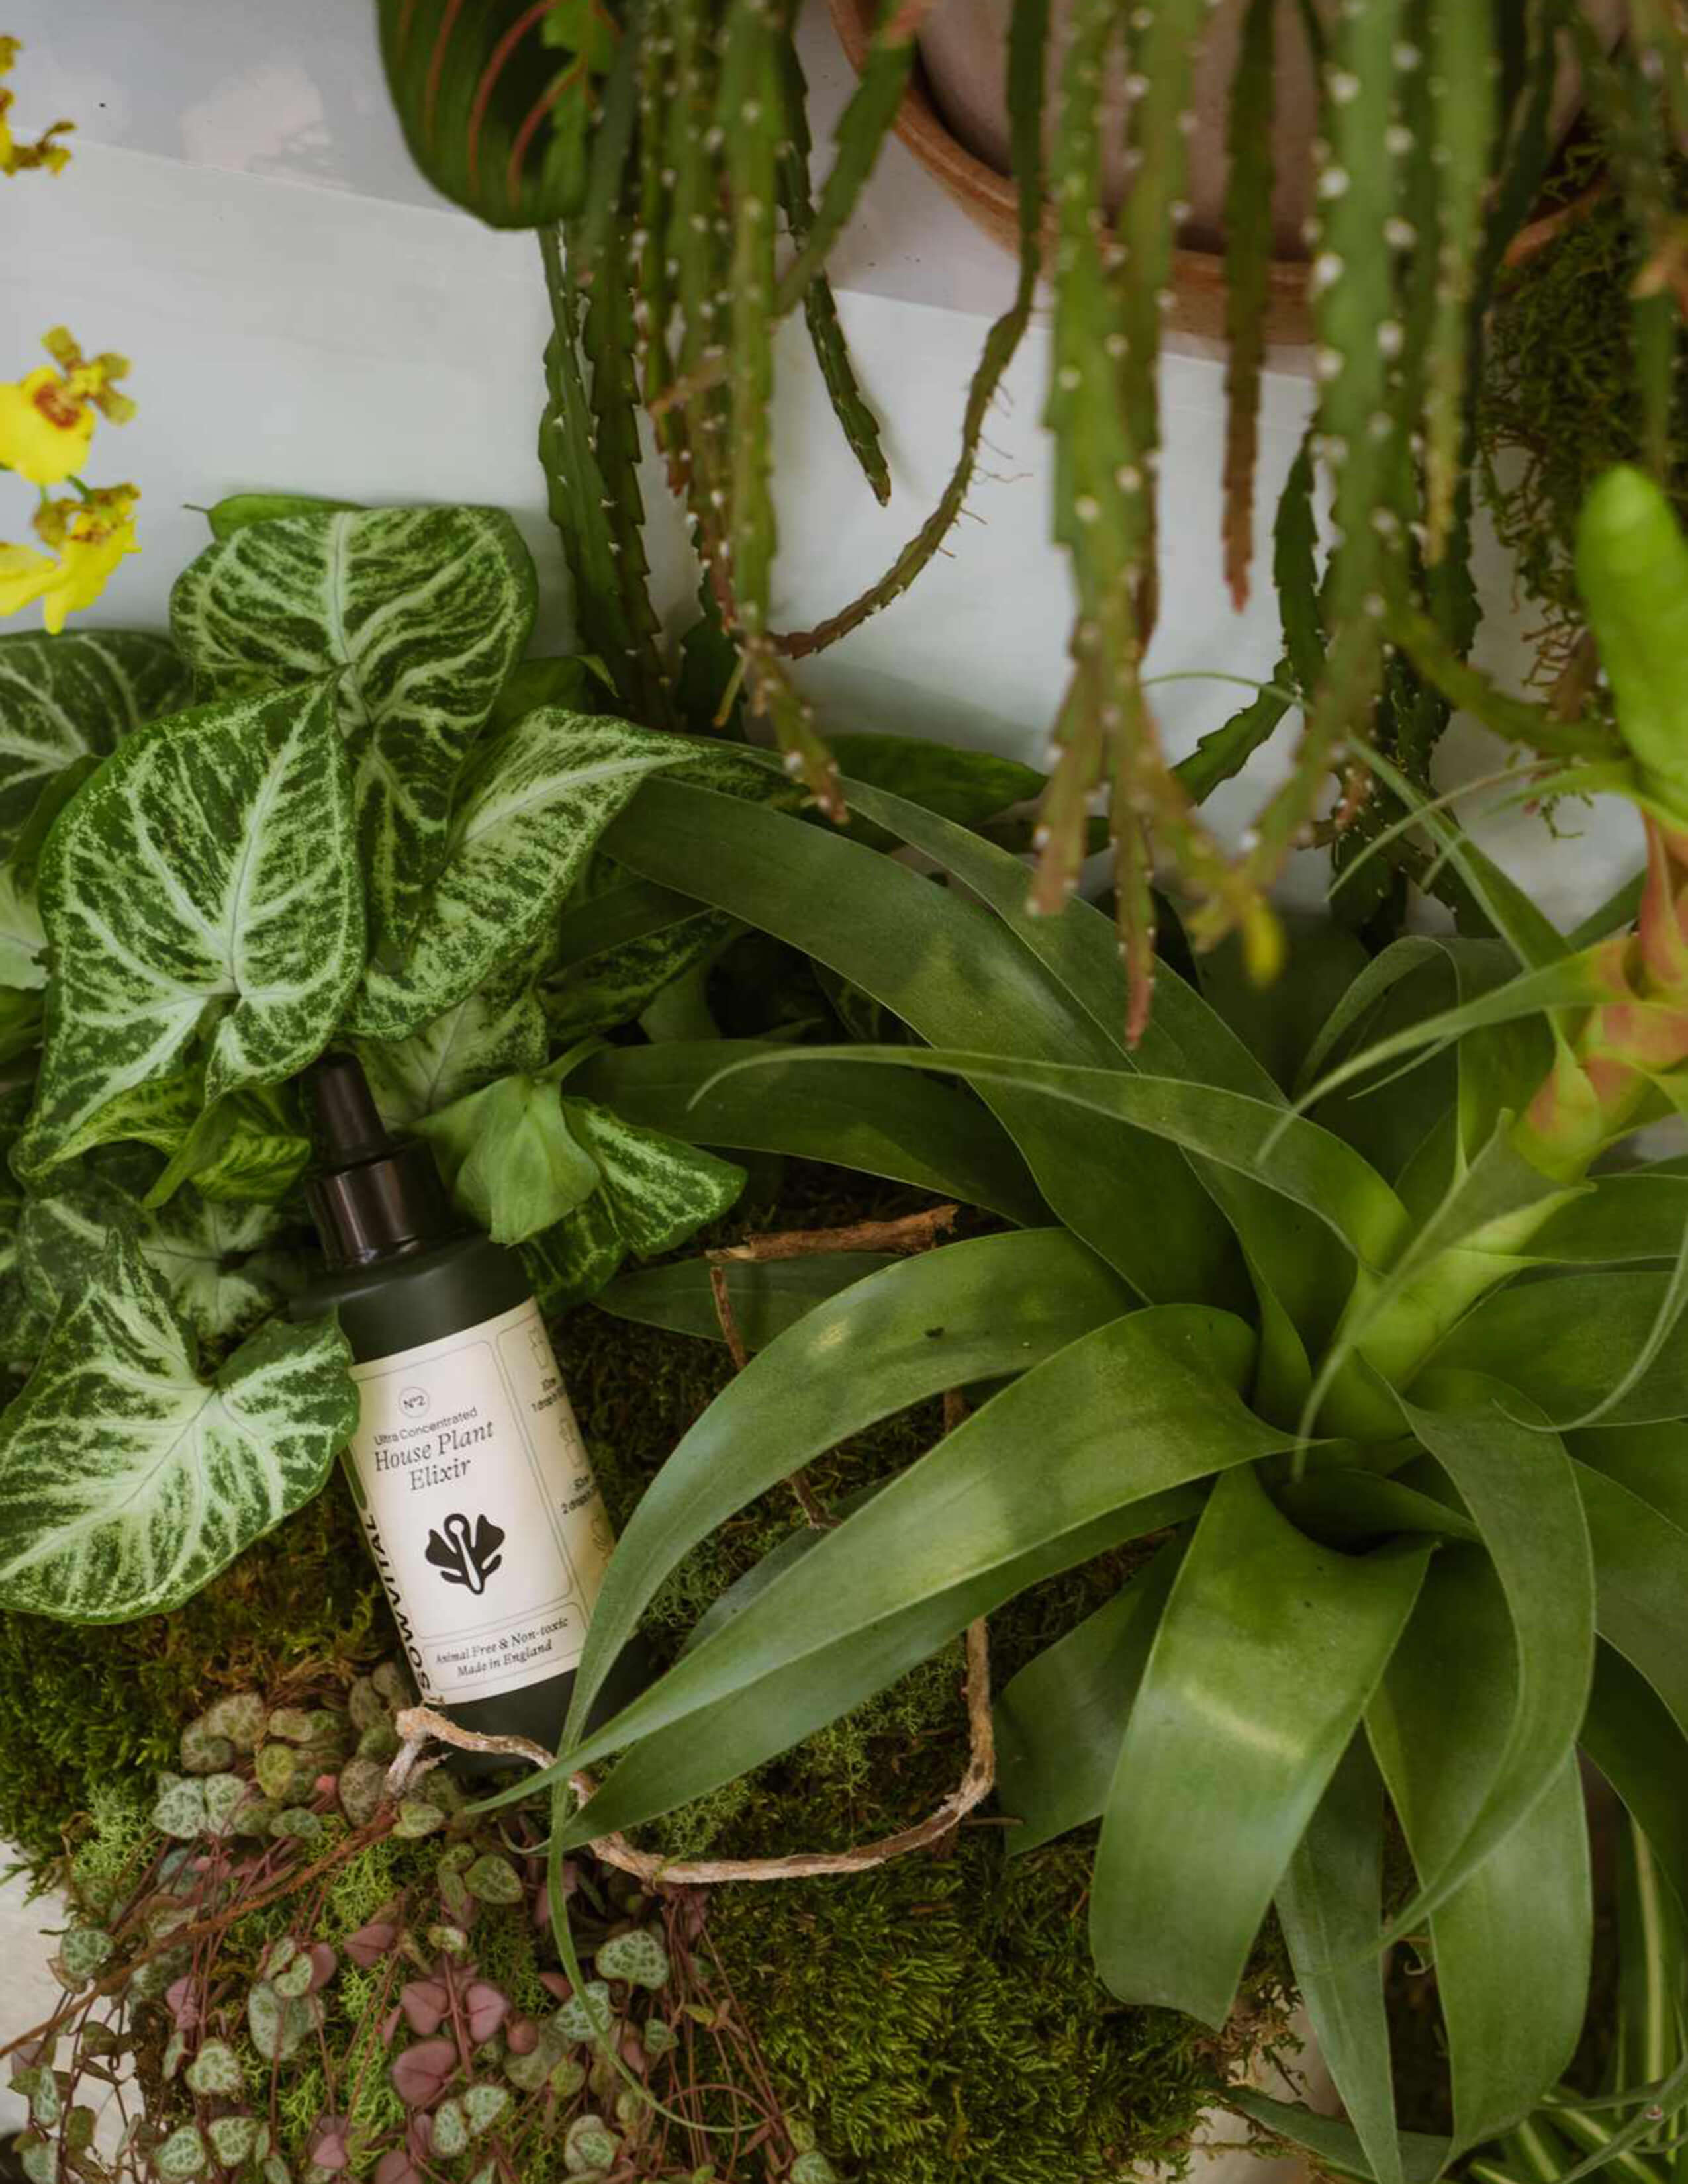 The Sowvital house plant elixir is surrounded by Syngonium Batik and a big plant with a load of long leaves.